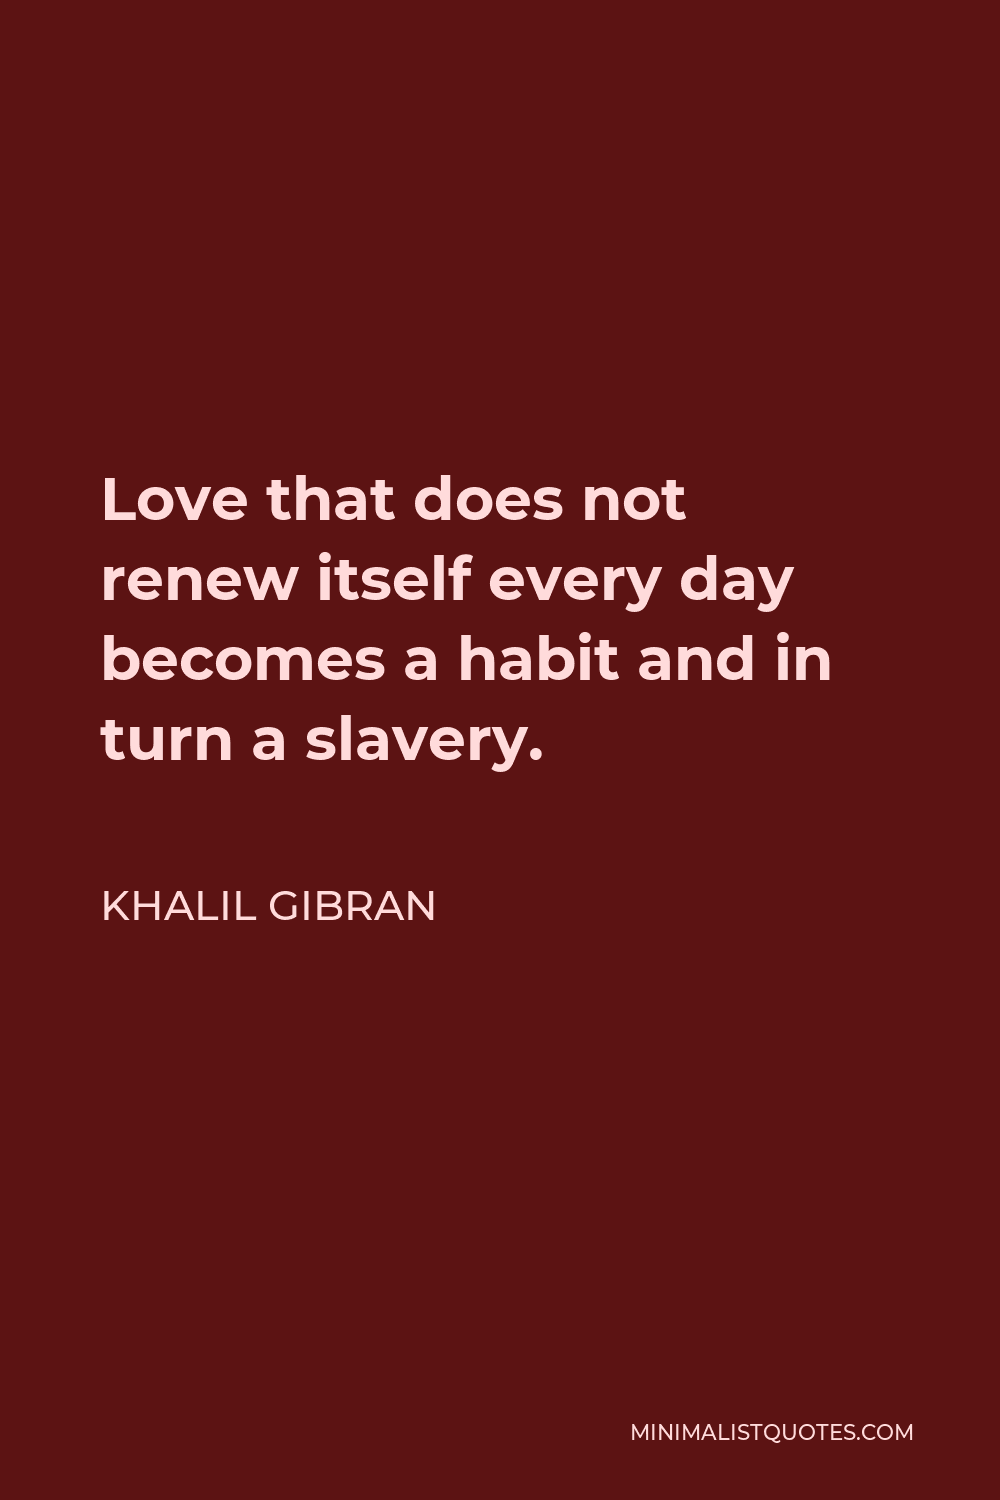 Khalil Gibran Quote - Love that does not renew itself every day becomes a habit and in turn a slavery.